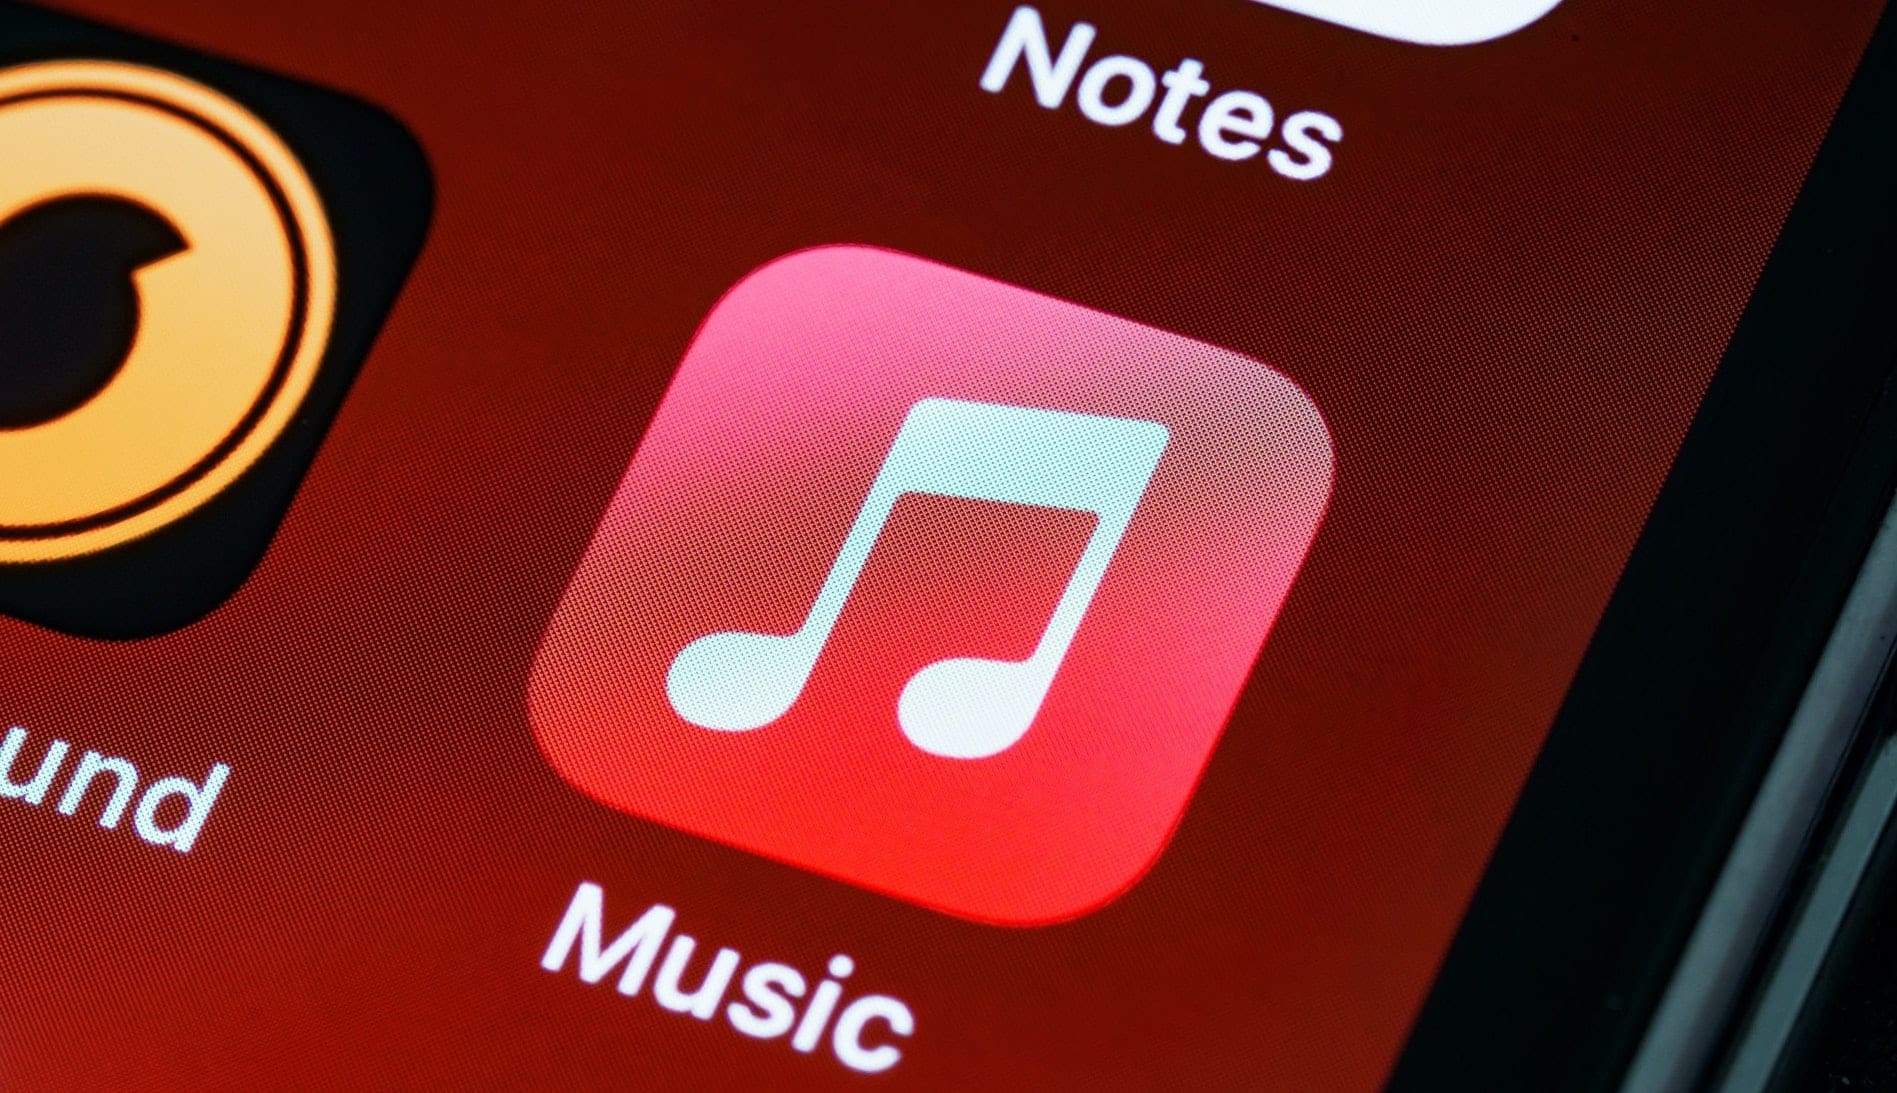 how to download from apple music